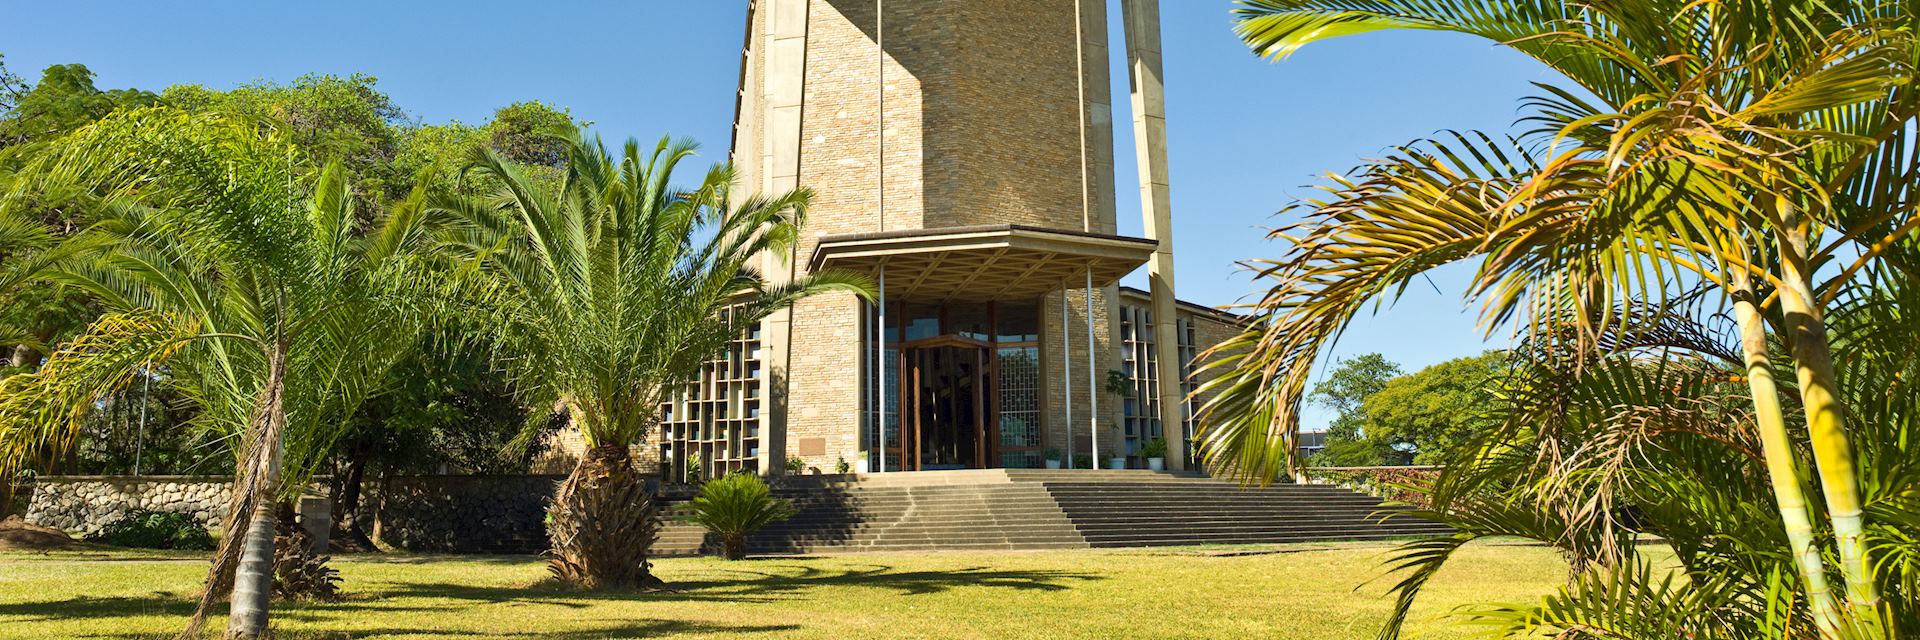 Anglican Cathedral of the Holy Cross, Lusaka